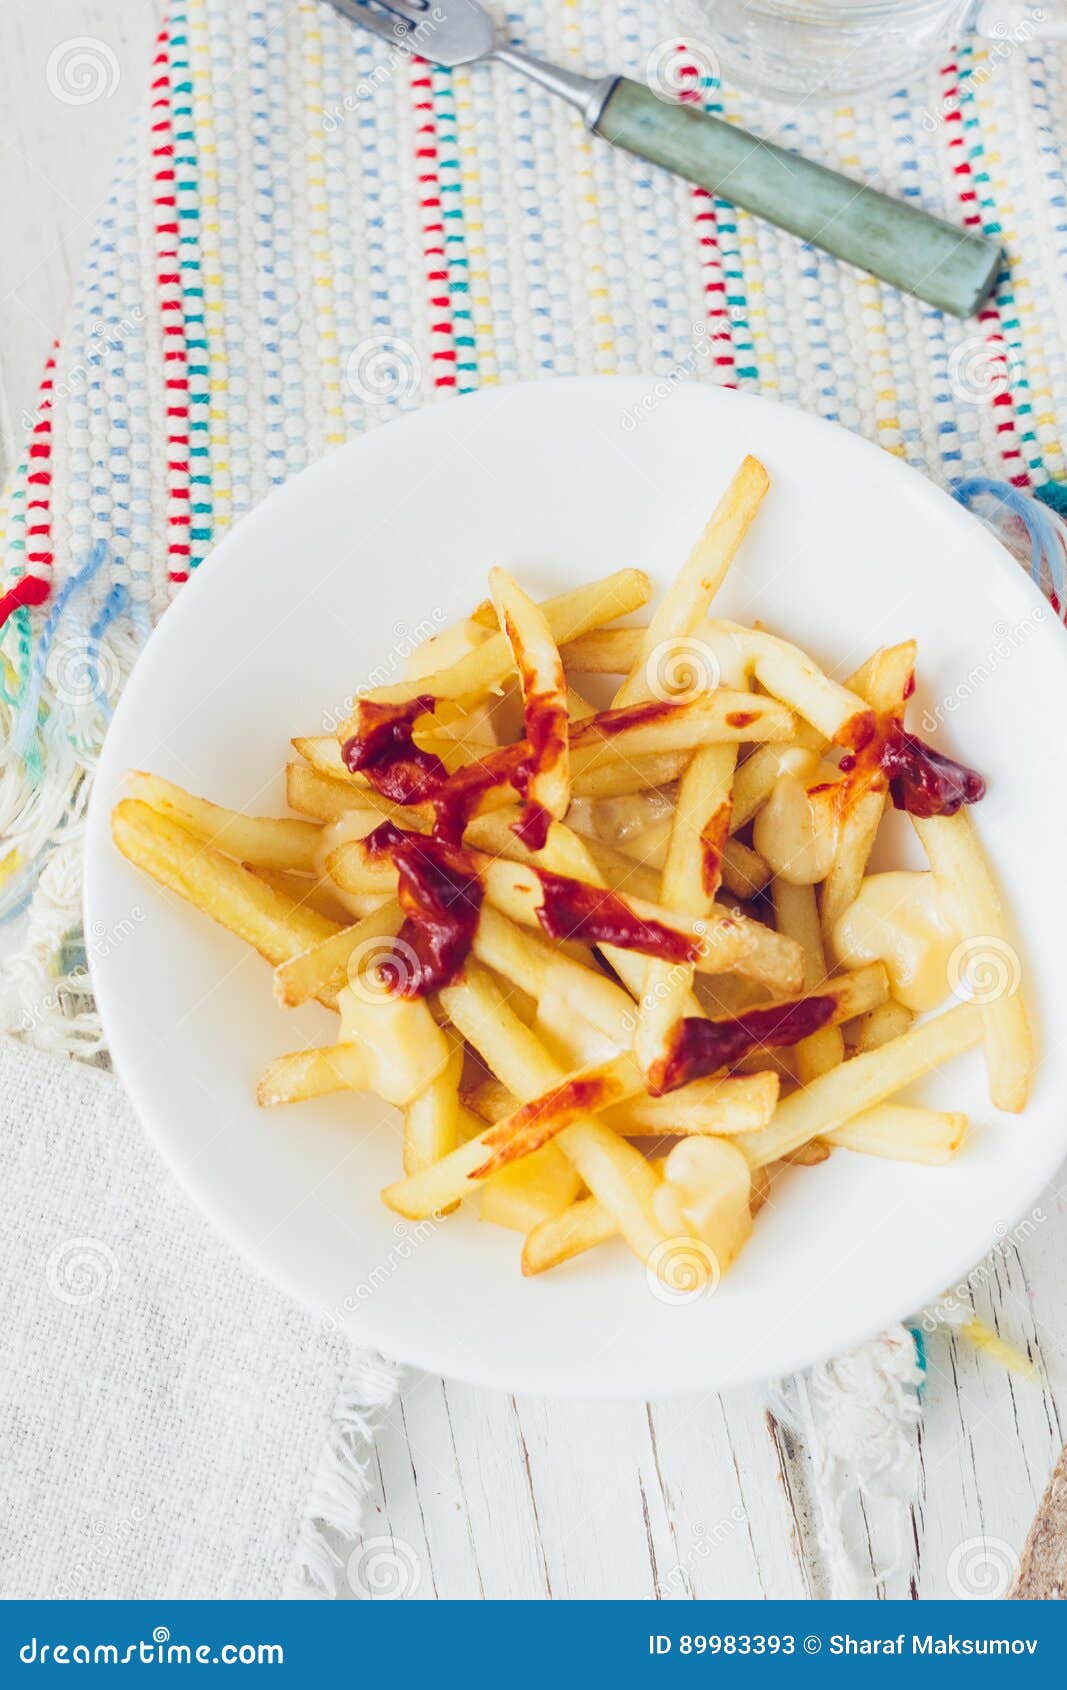 Poutine Fries with Tomato Sauce and Cheese on White Table. Stock Image ...